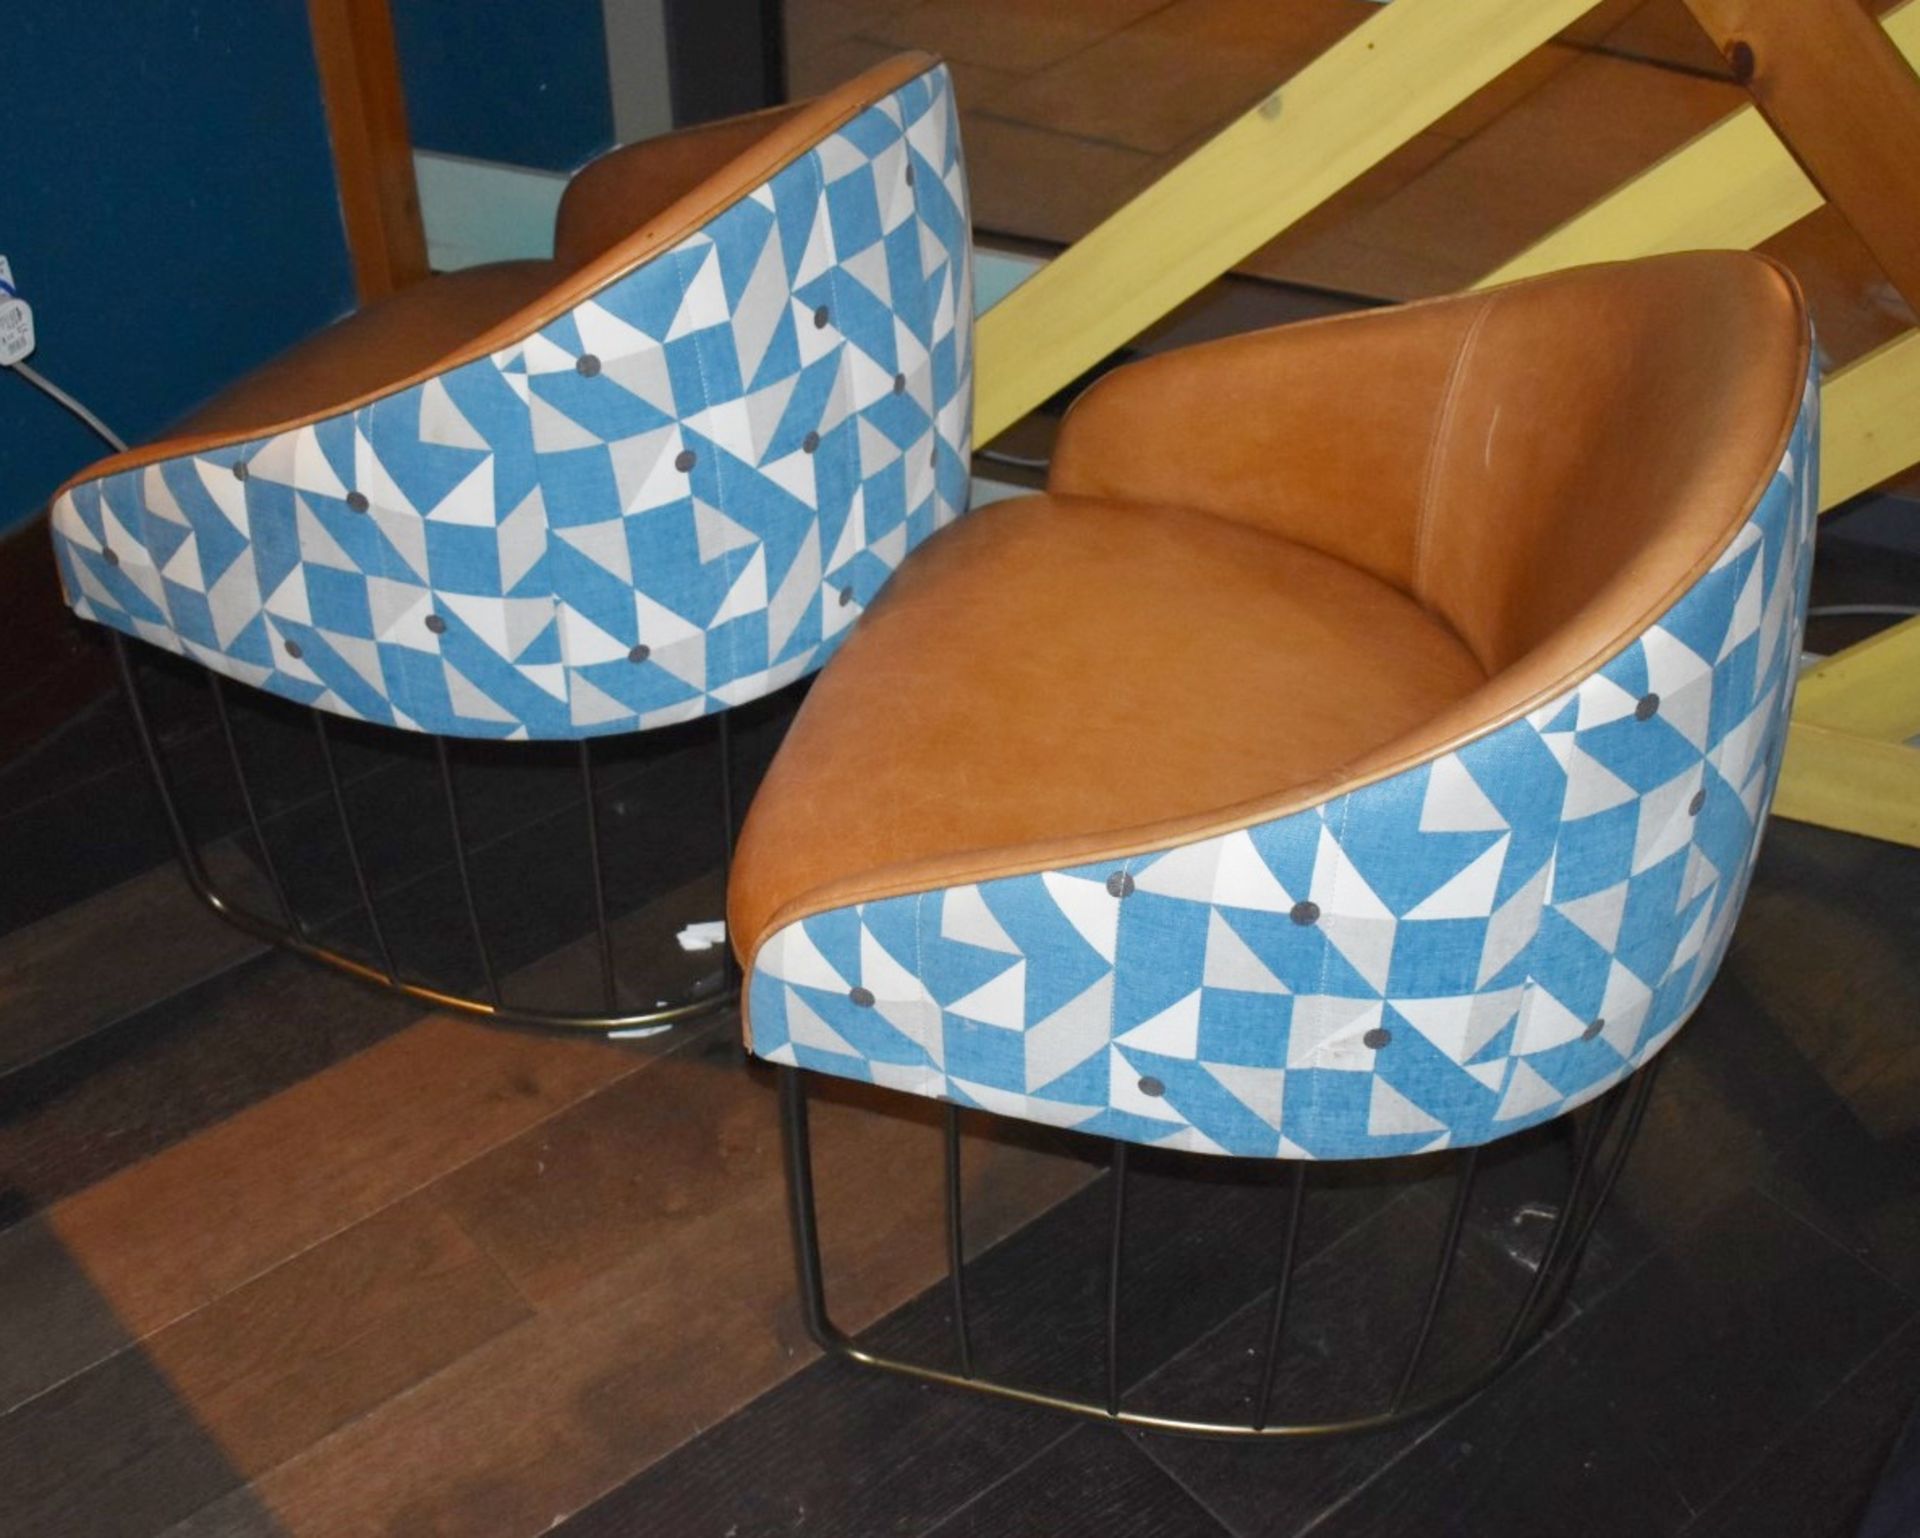 3 x Designer Sancal Lounge Chairs - Perfect for the Home, Hotels, Restaurants - Tan Seath With - Image 4 of 6